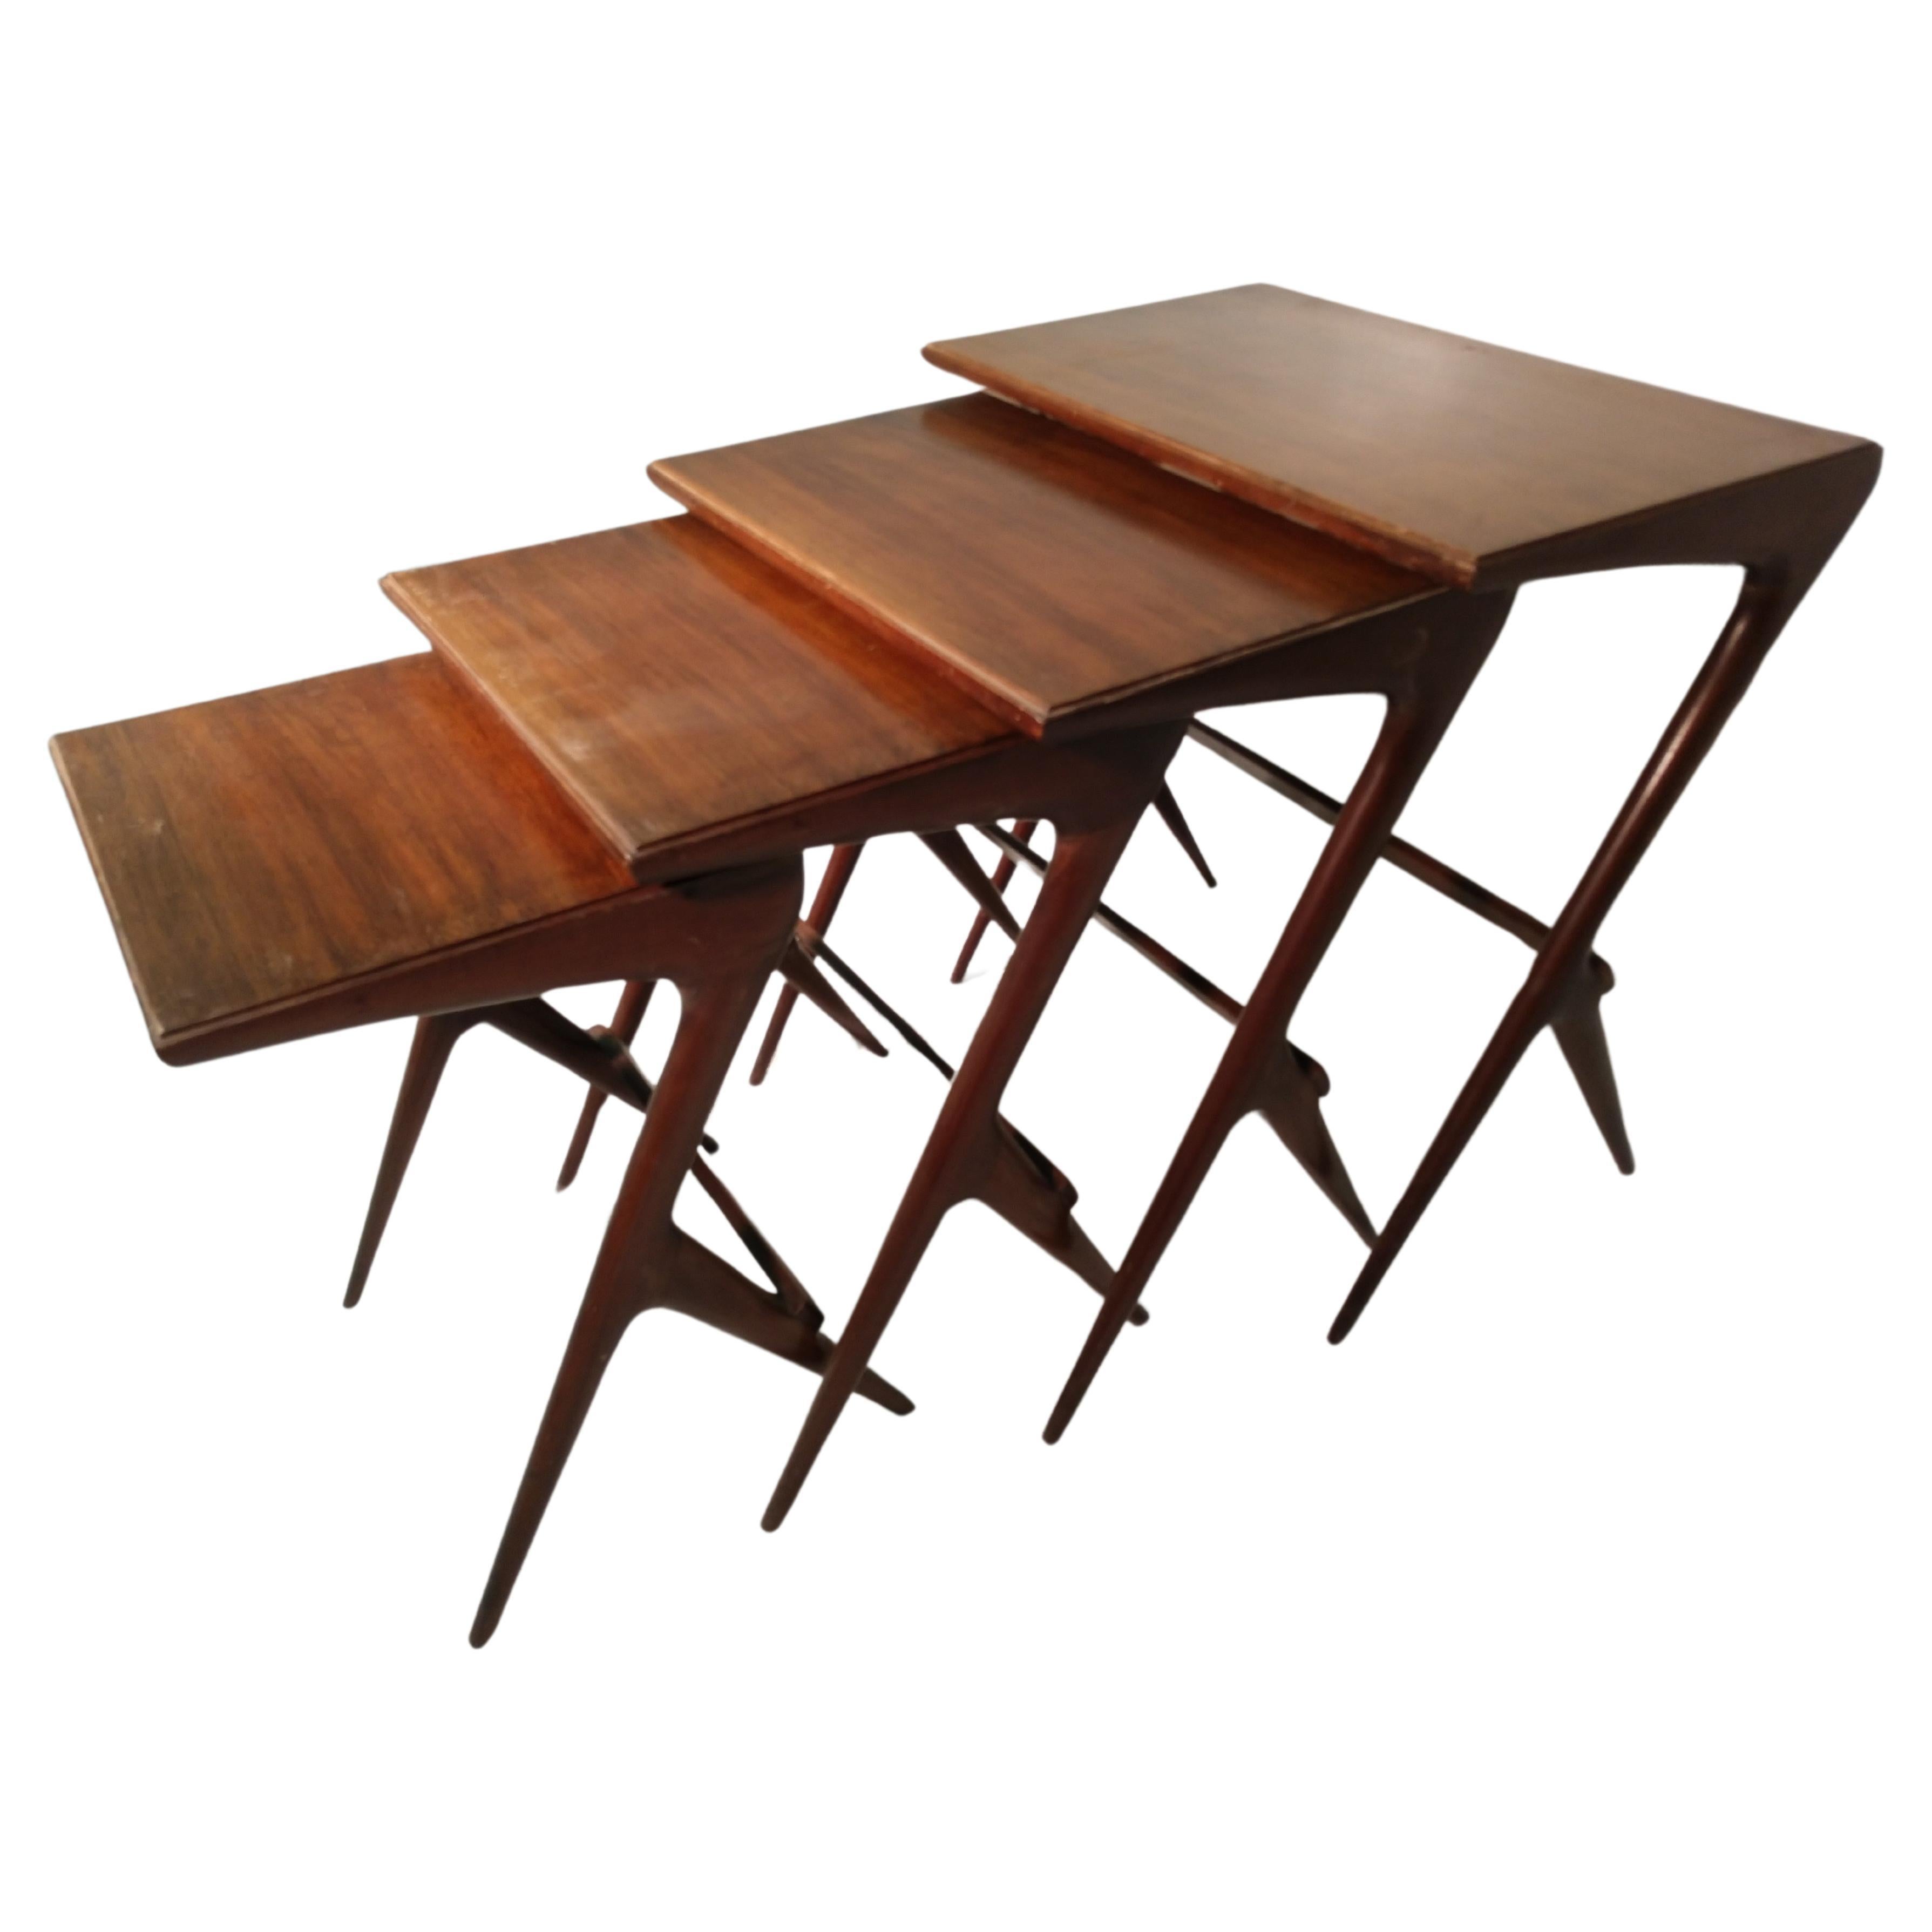 The Moderns Modern Set of 4 Walnut Nesting Tables by Ico Parisi